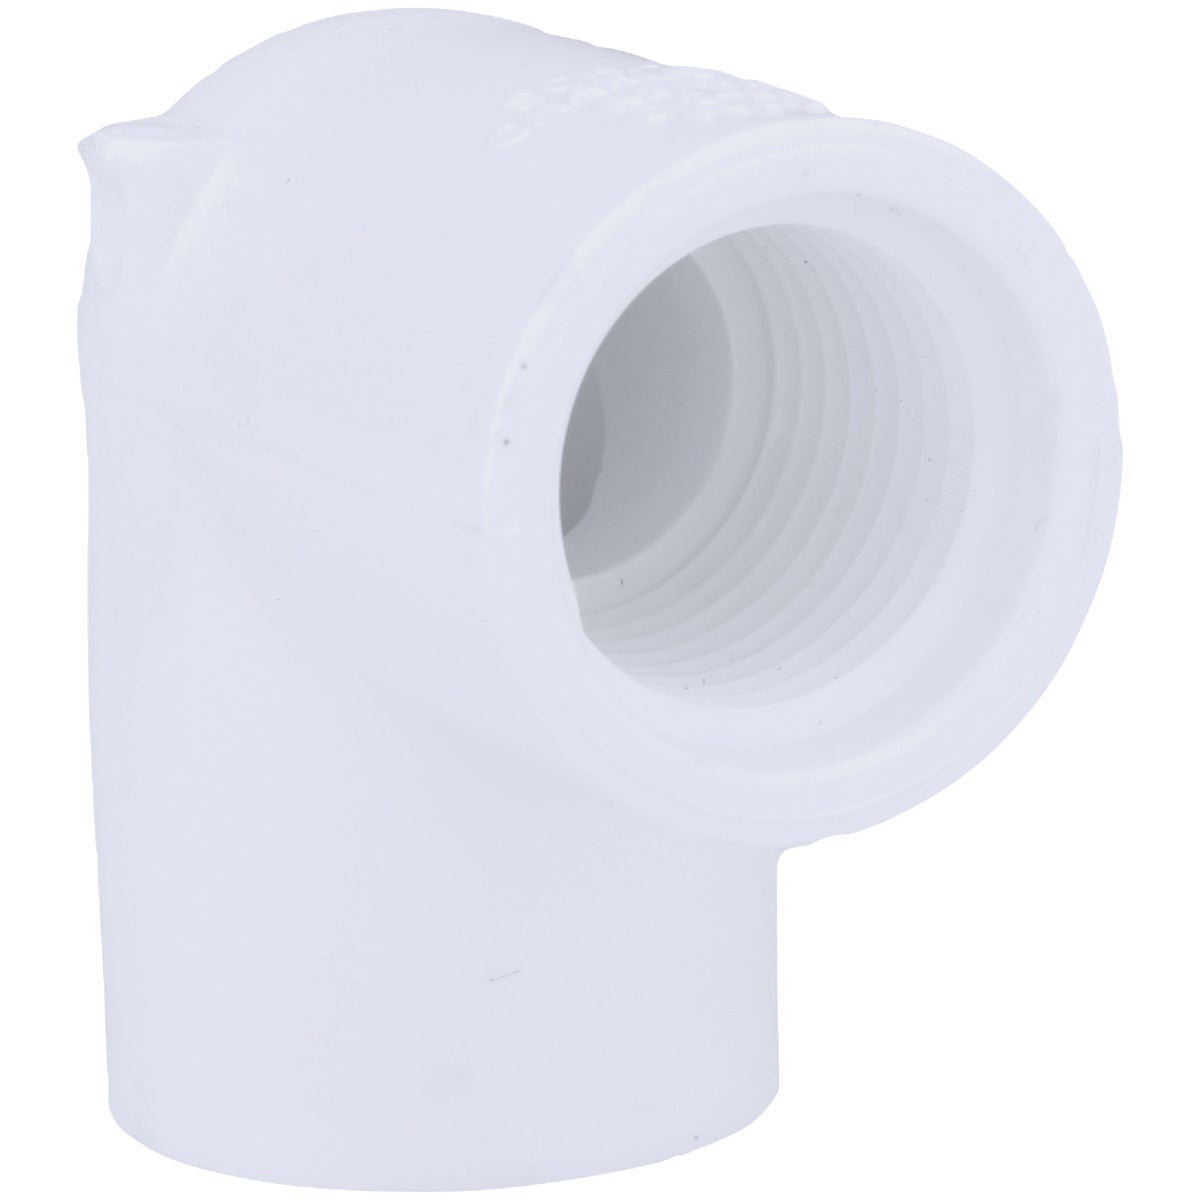 Item 411003, White to fit standard weight pressure fitting for I.P.S.